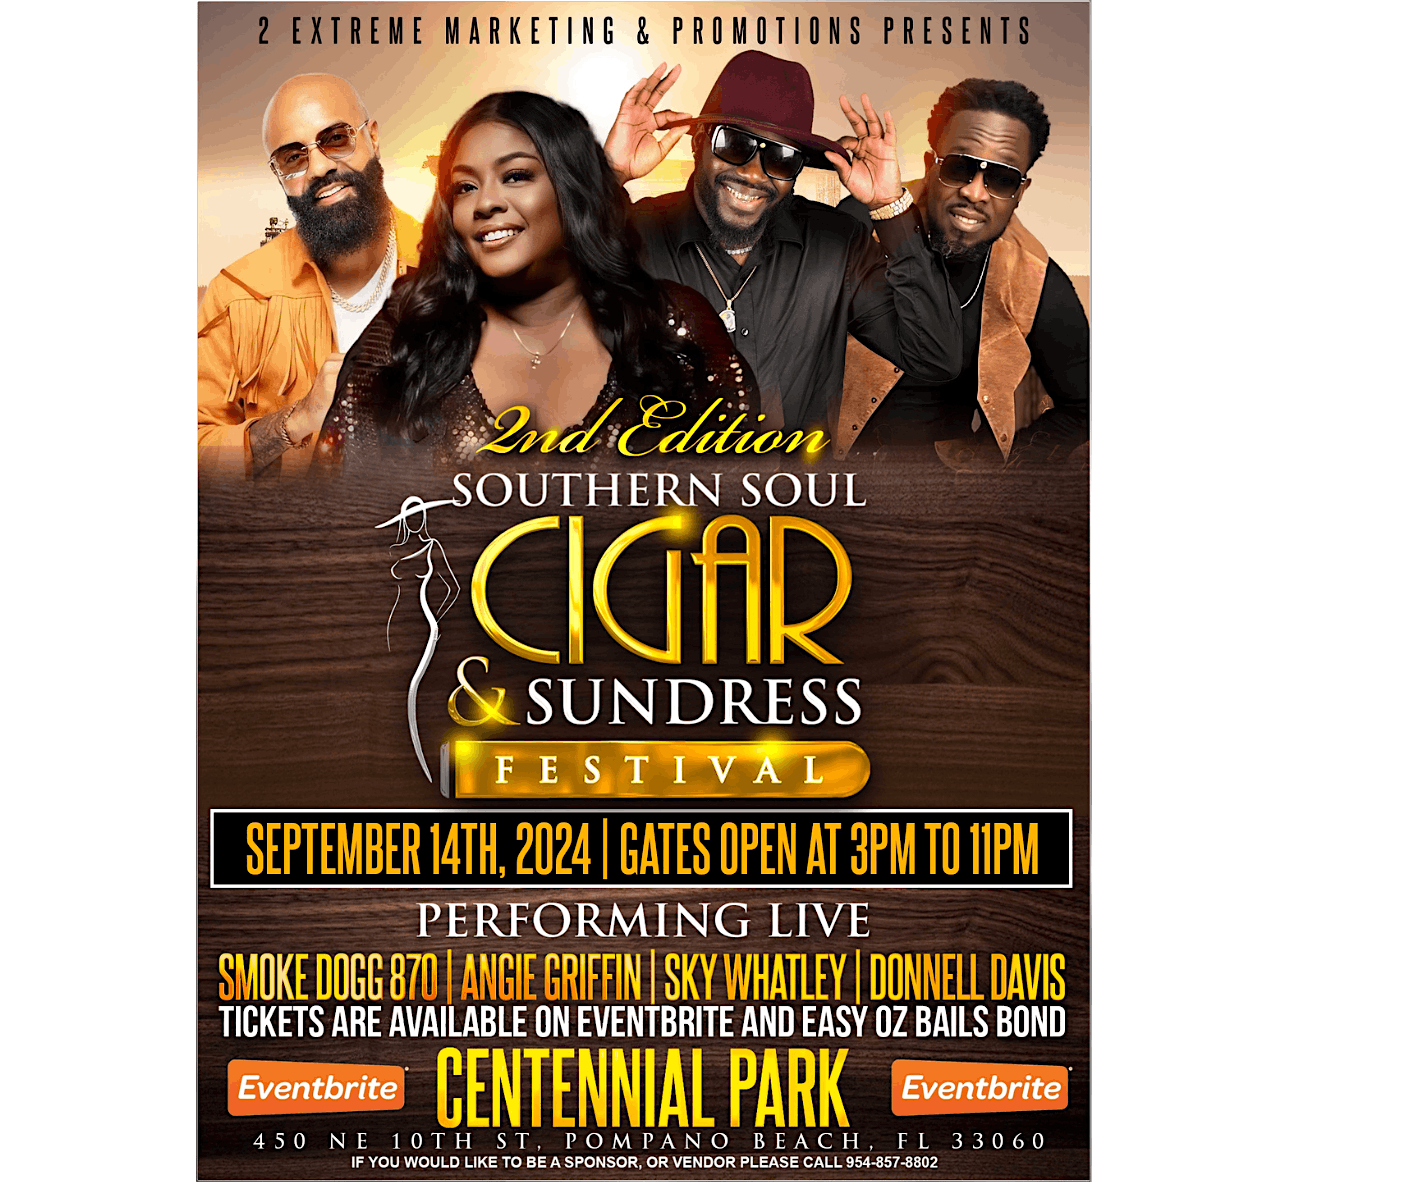 Southern Soul Cigar and Sundress Festival  2024 (2nd Edition)